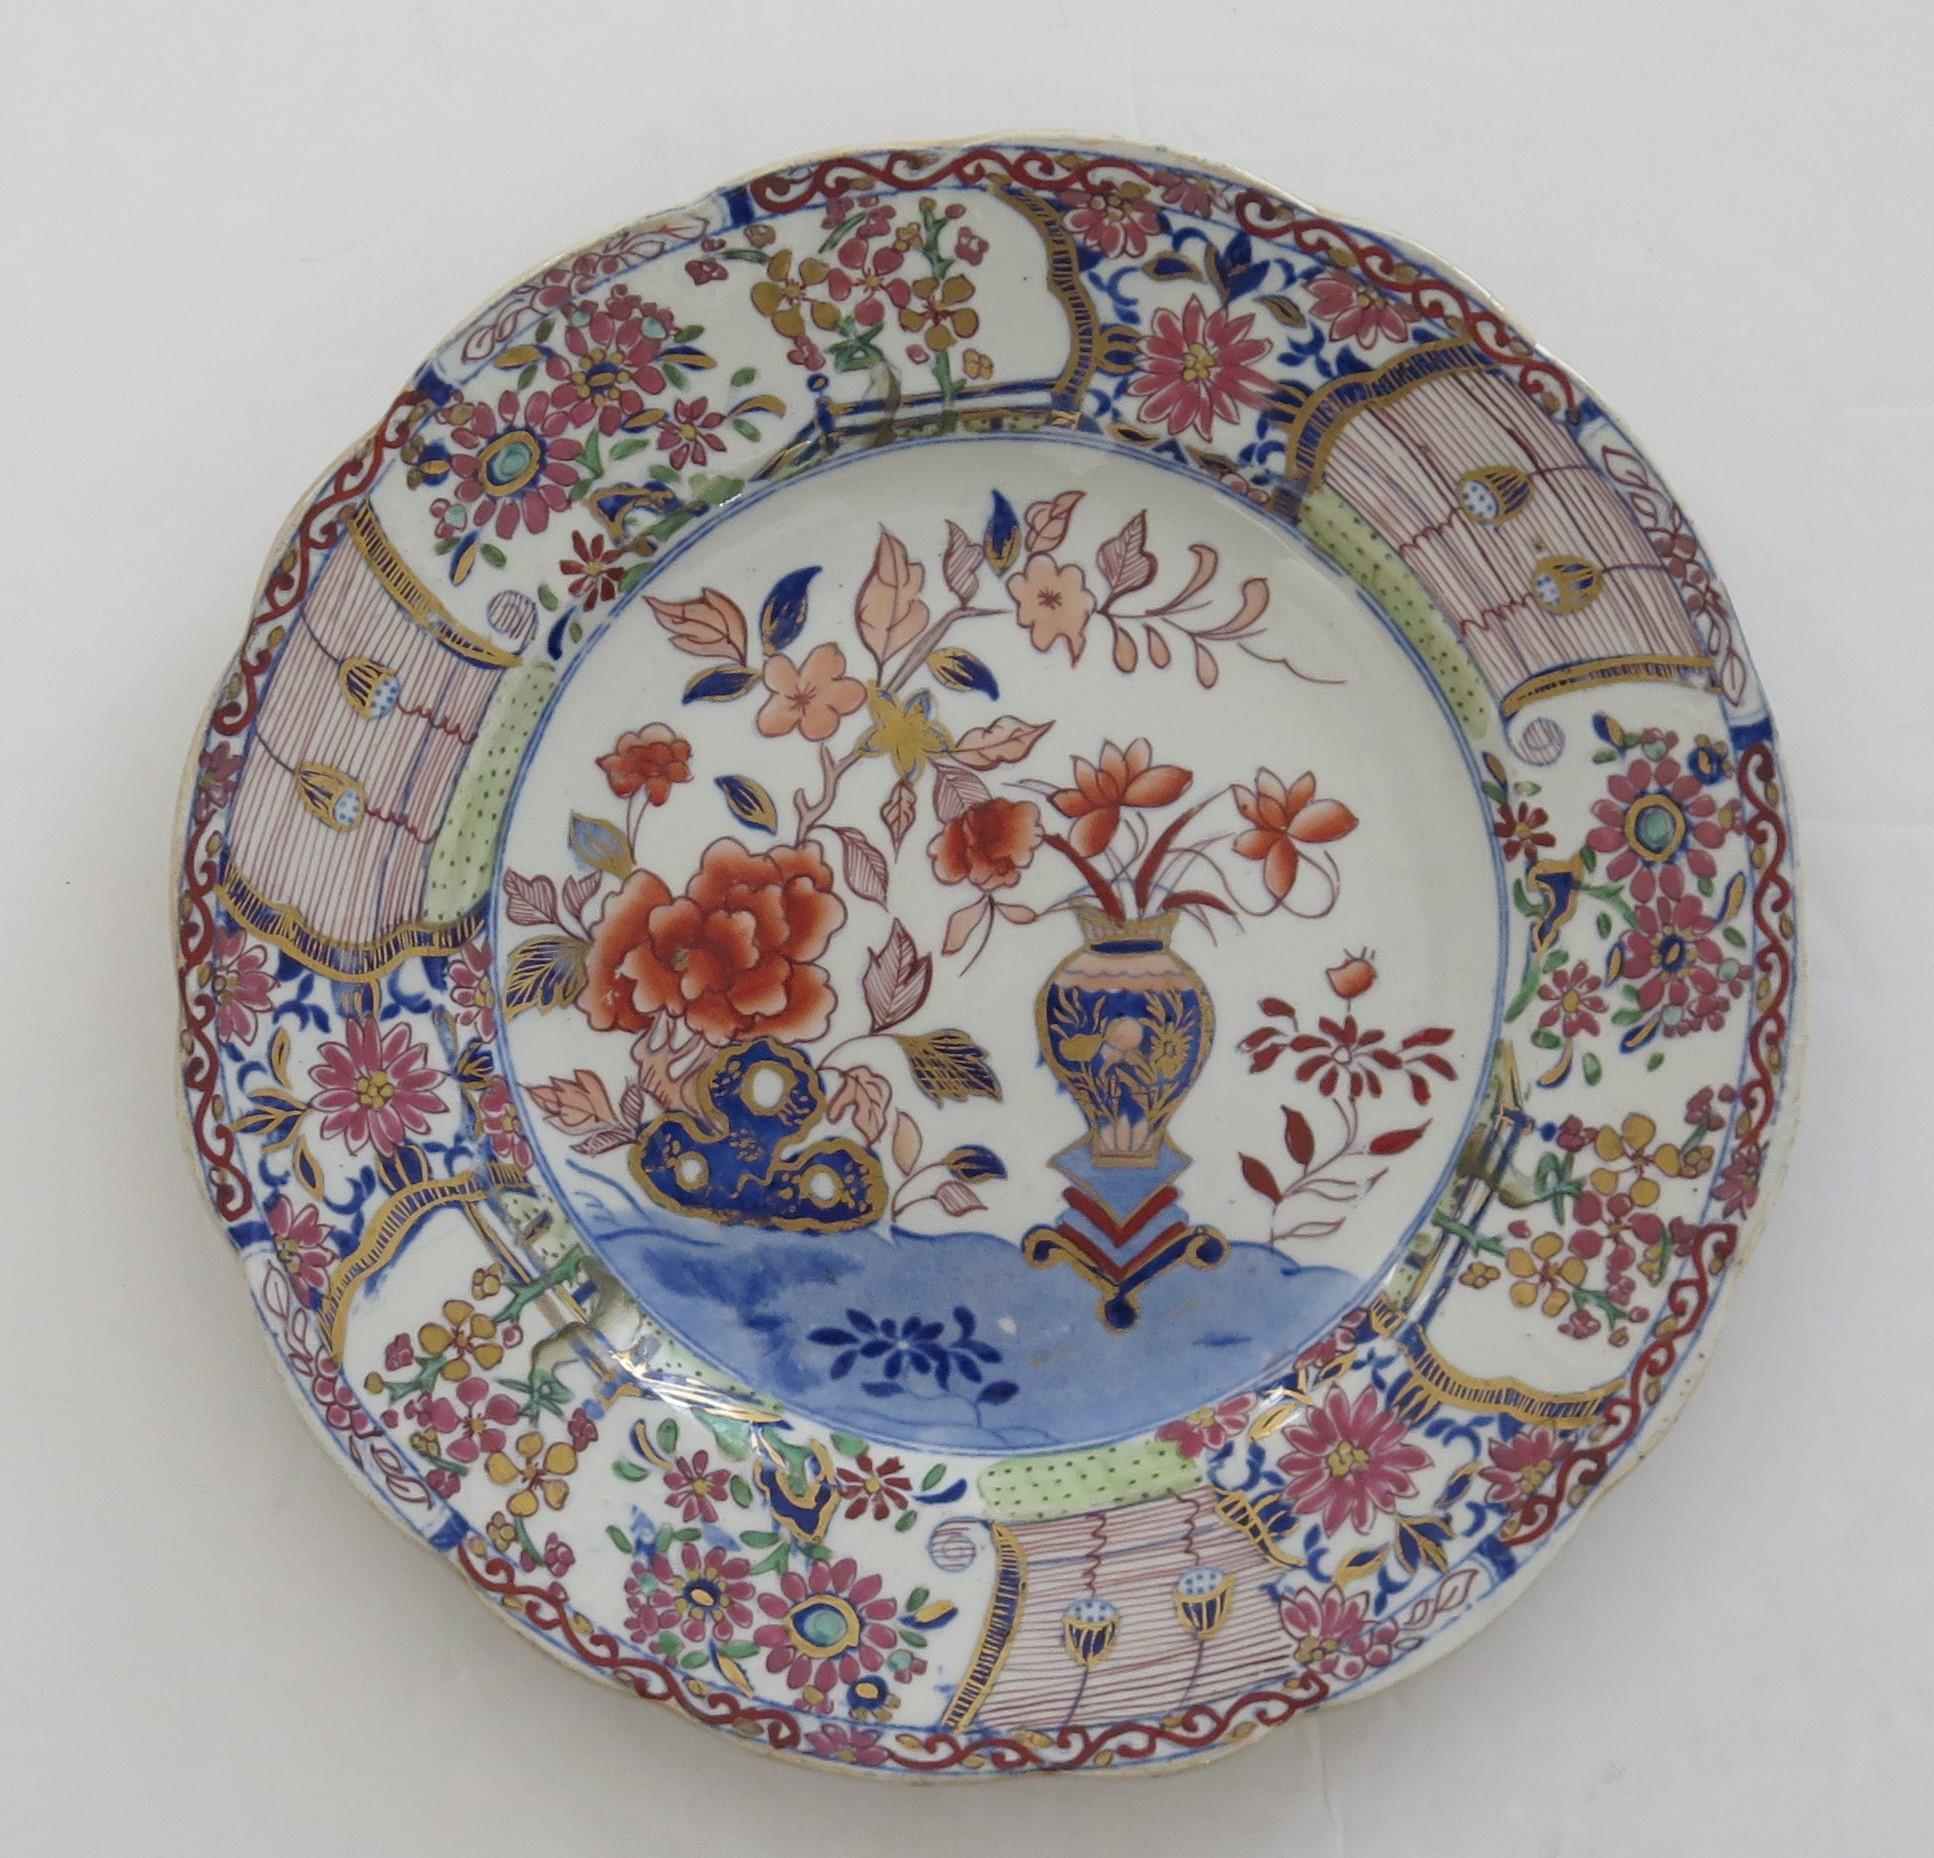 This is a very decorative ironstone pottery Plate produced by the Mason's factory at Lane Delph, Staffordshire, England, circa 1818.

The plate is circular with a wavy indented edge.

This Plate is beautifully and elaborately decorated in one of